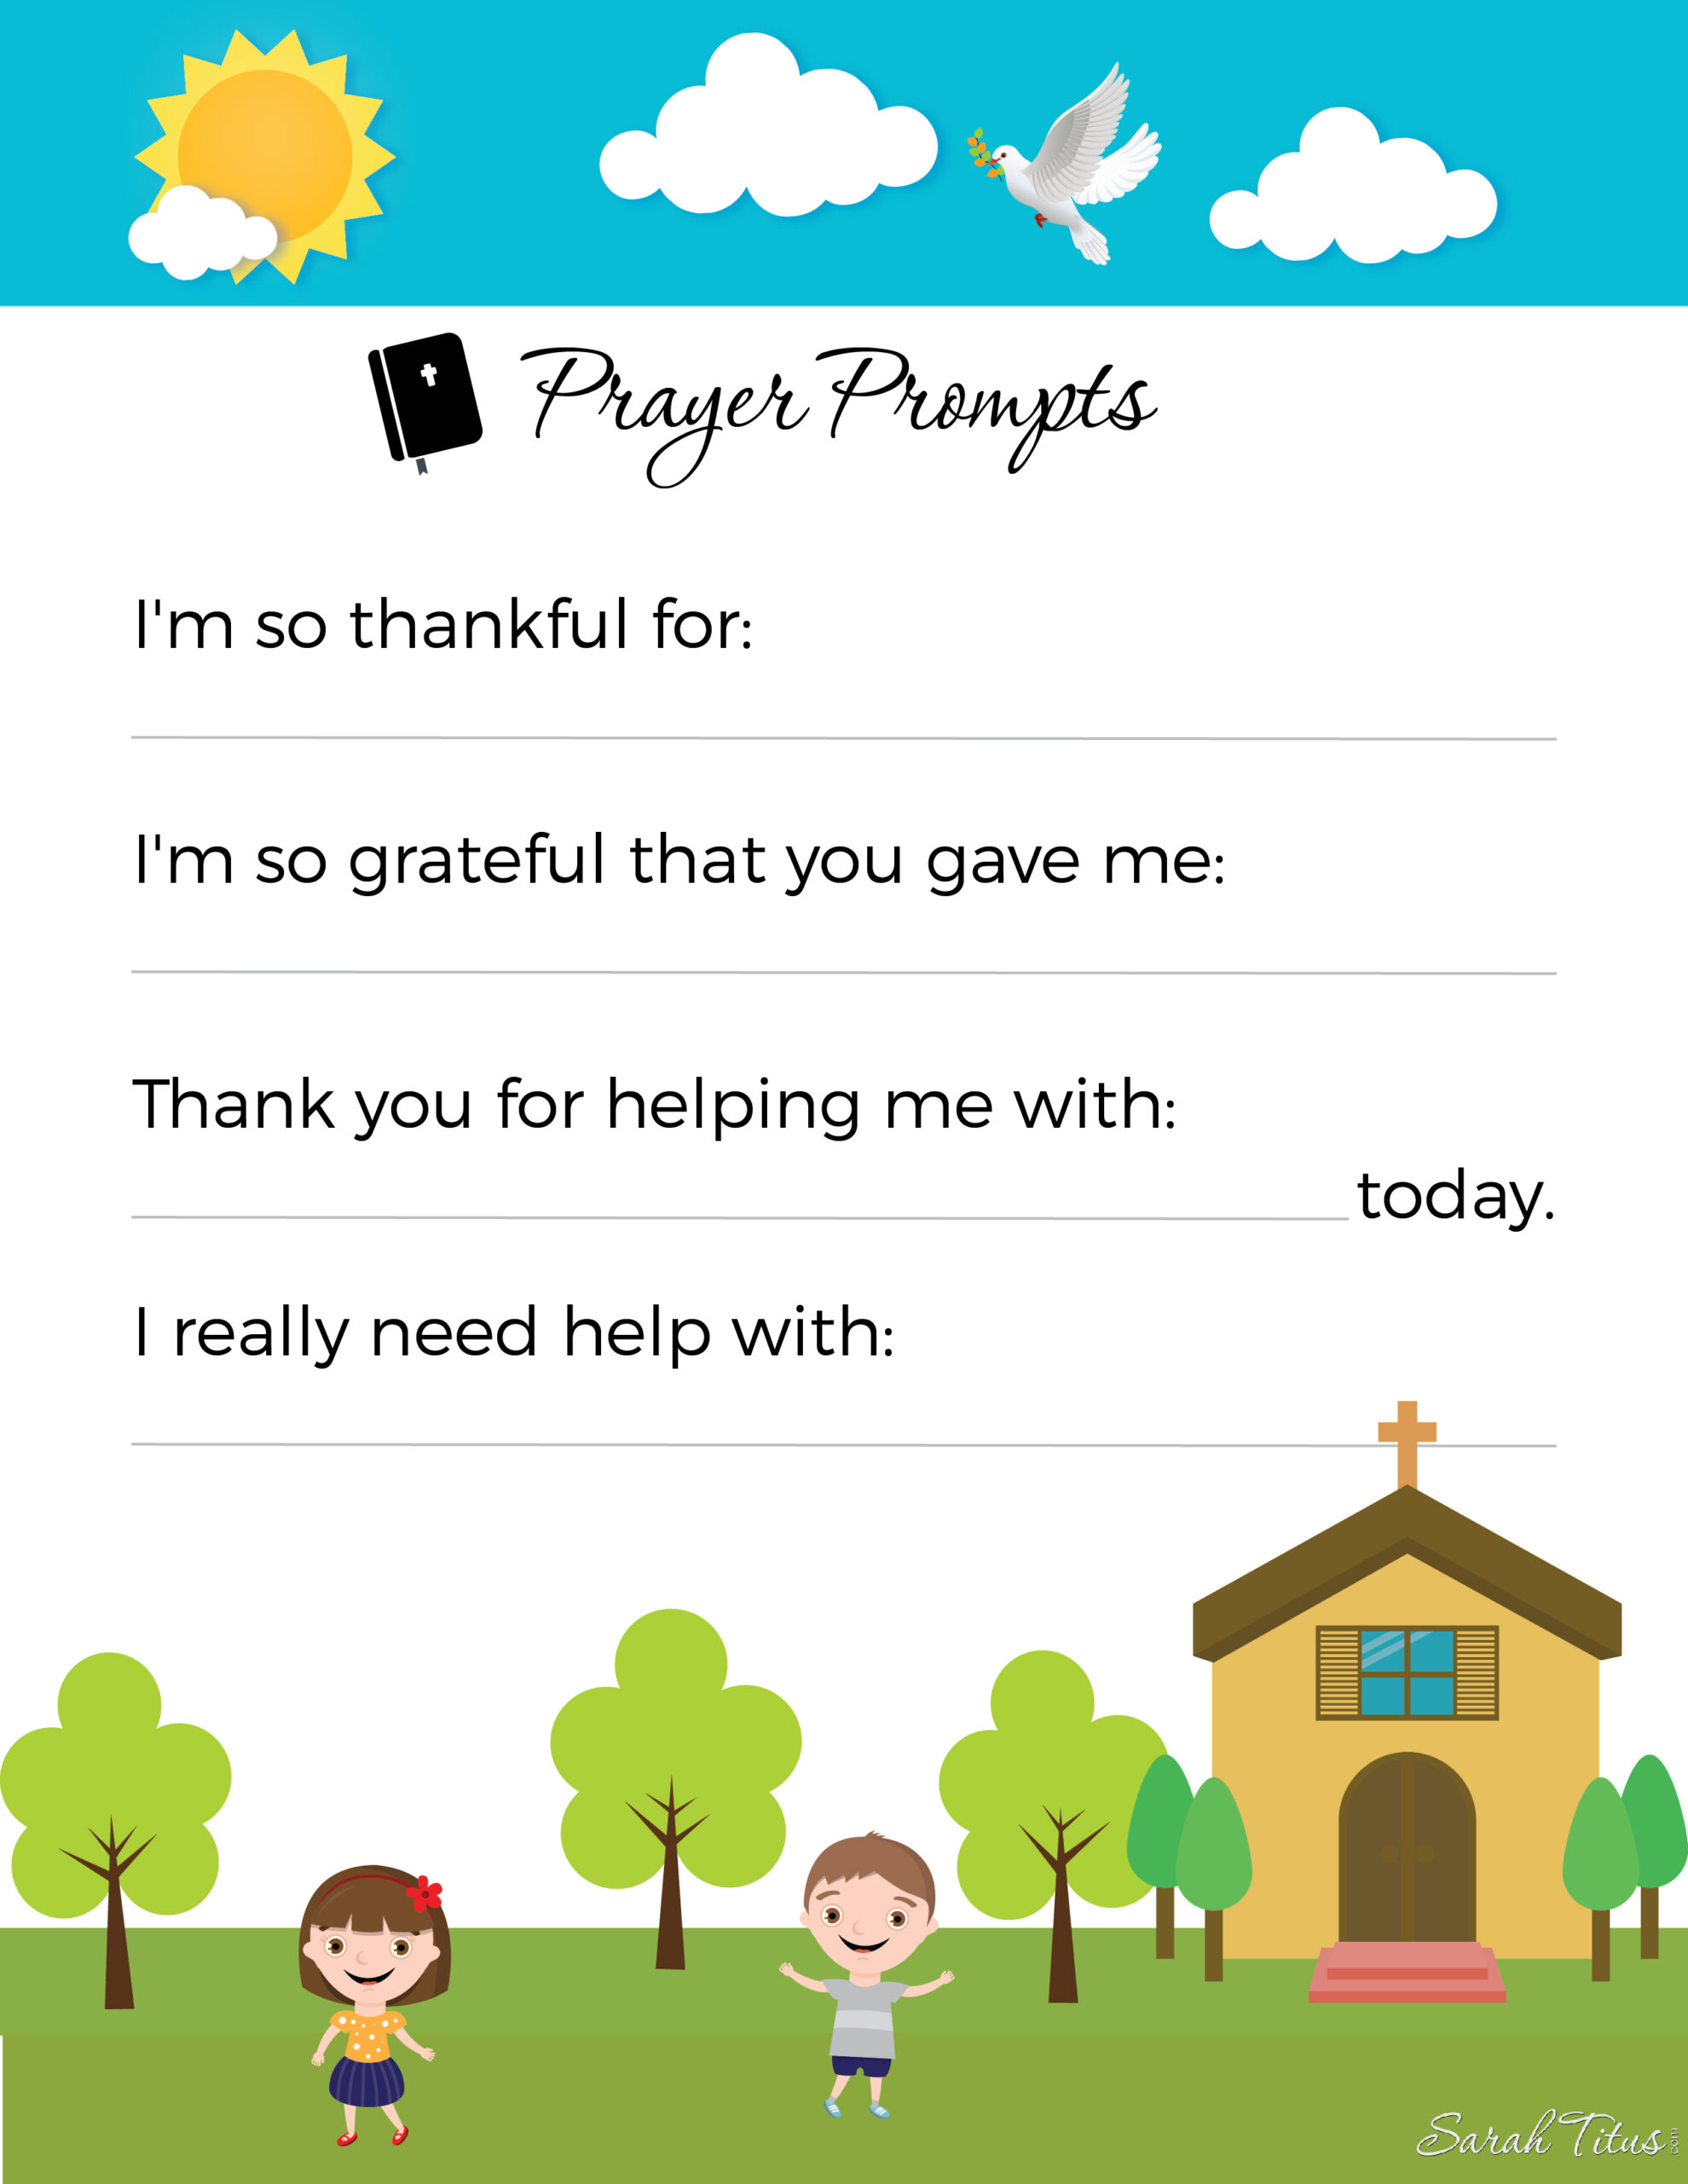 A rock-solid prayer life is one of the best gifts you can give your kids, but it can be difficult to get them there. Here's how to start a kid's prayer journal and get them excited about praying, plus some free printables to boot!